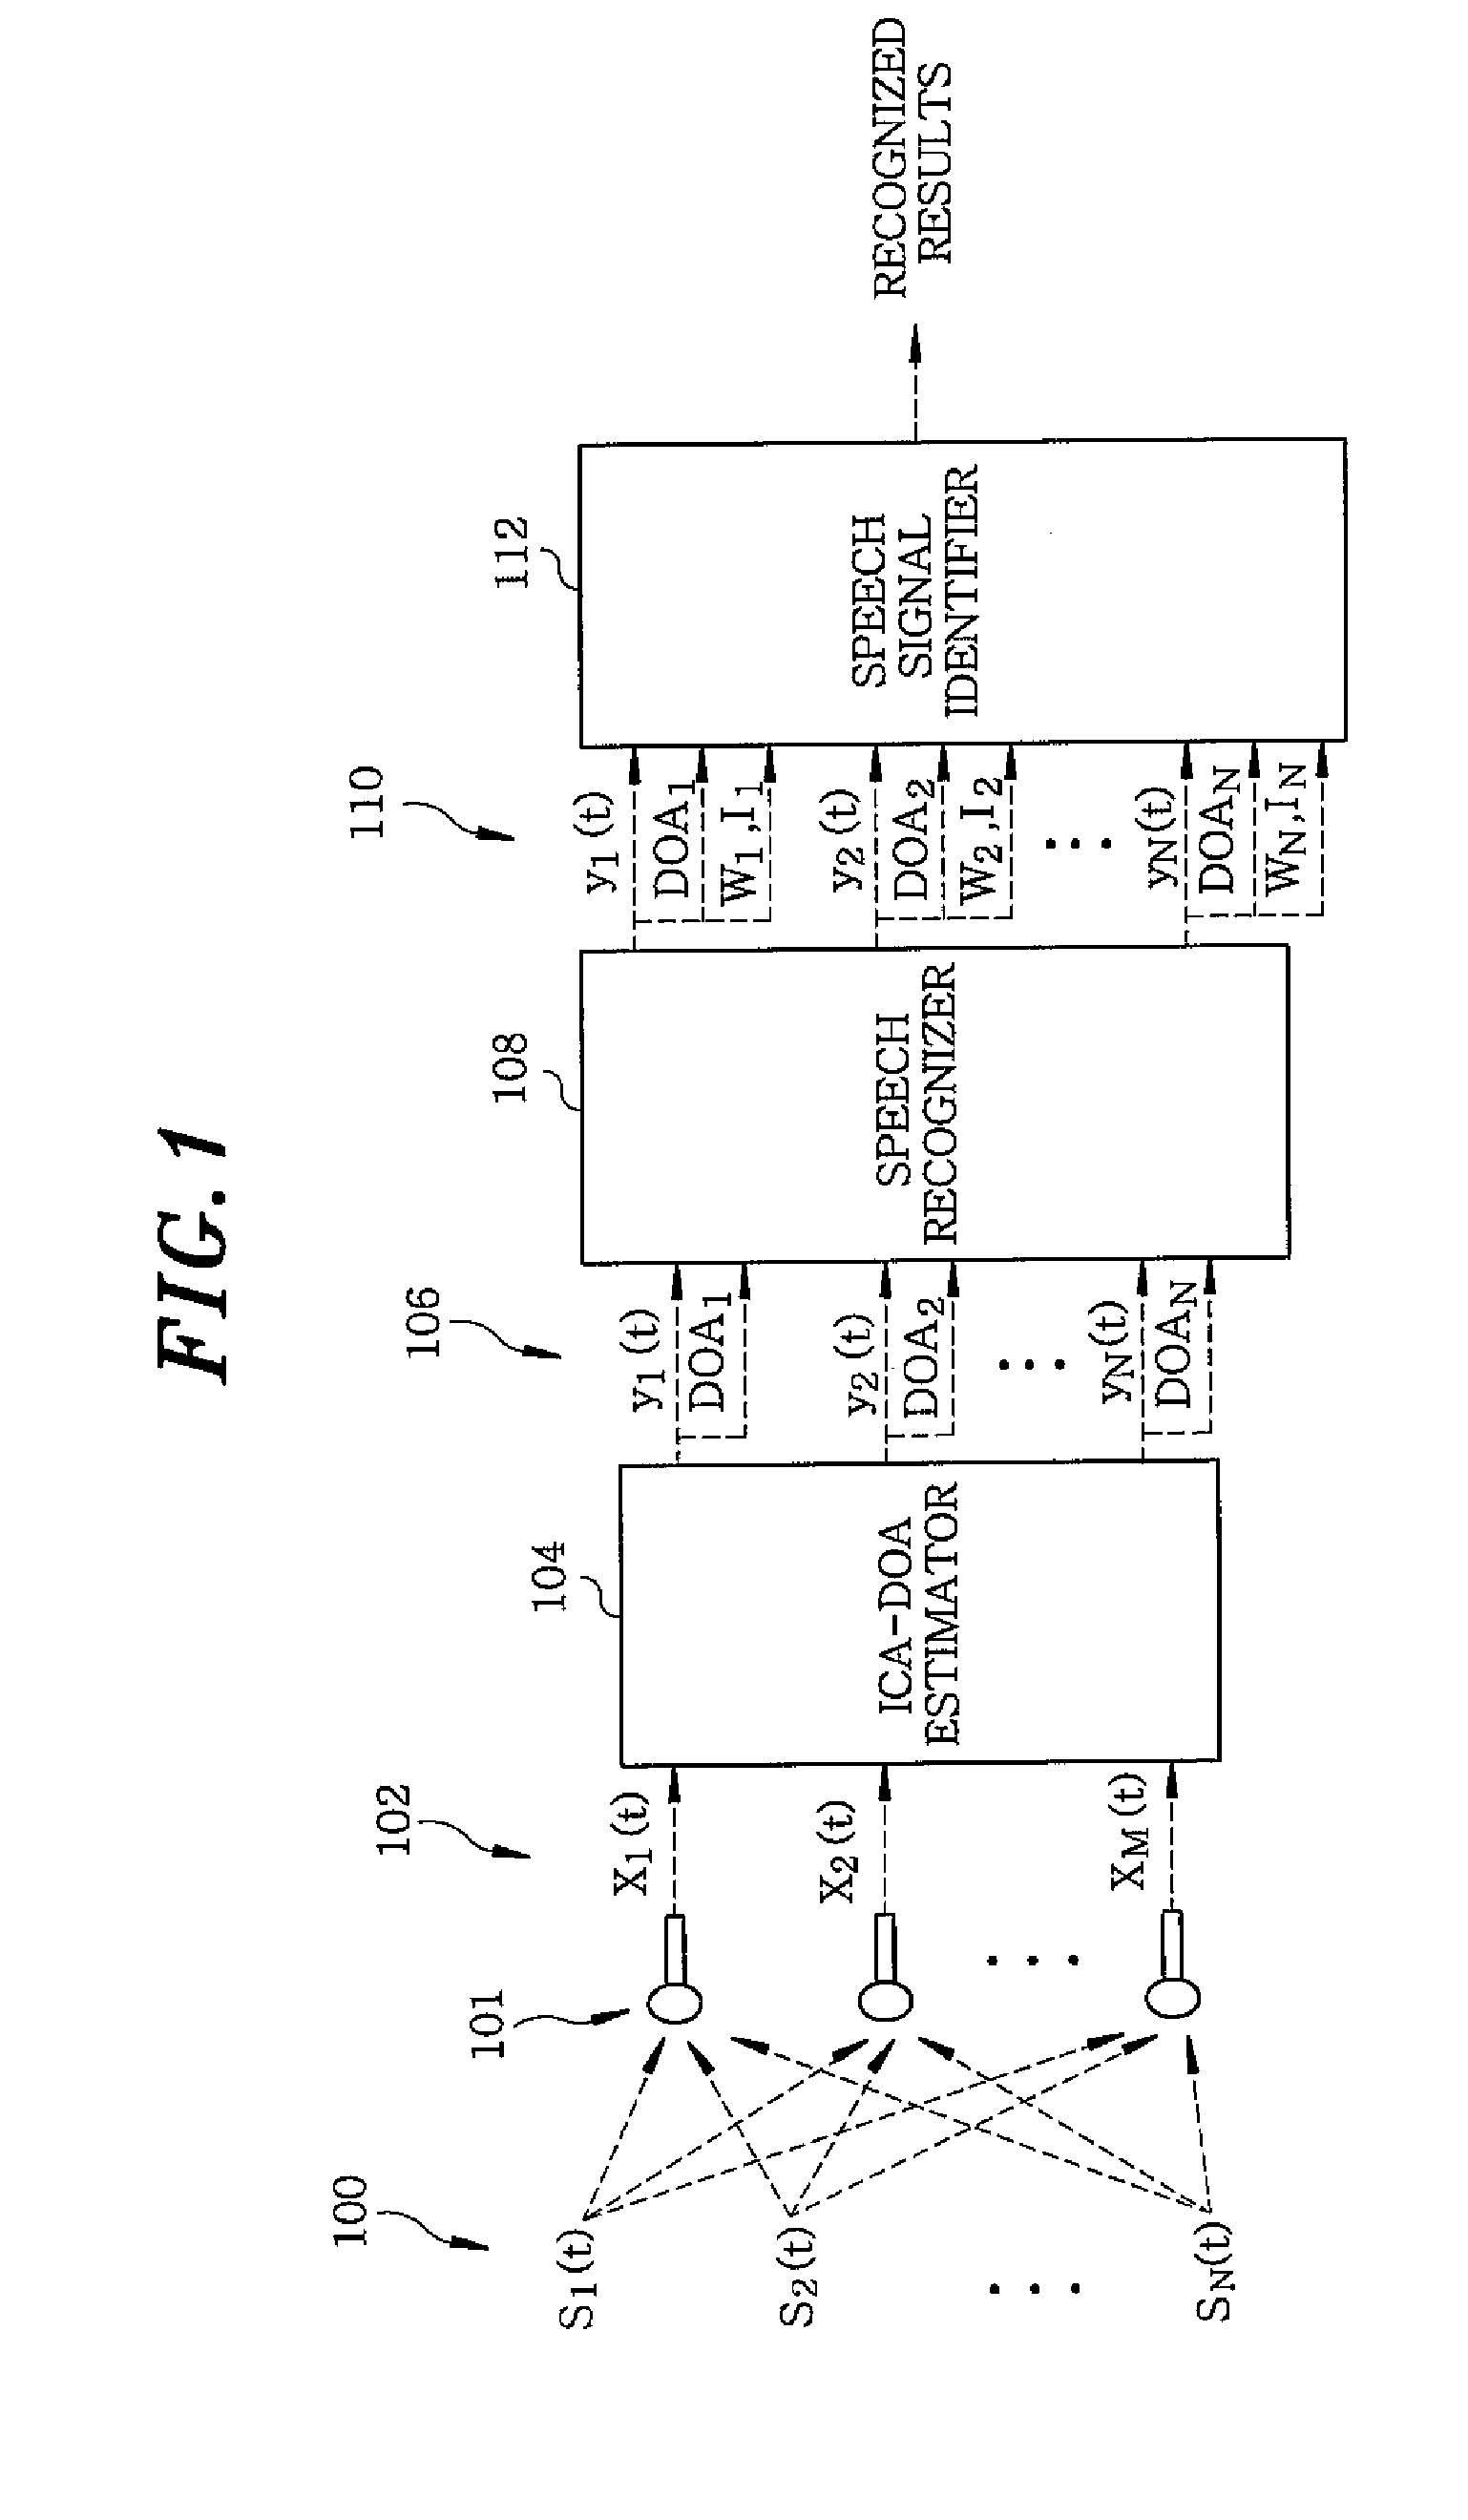 Apparatus and method for speech recognition based on sound source separation and sound source identification